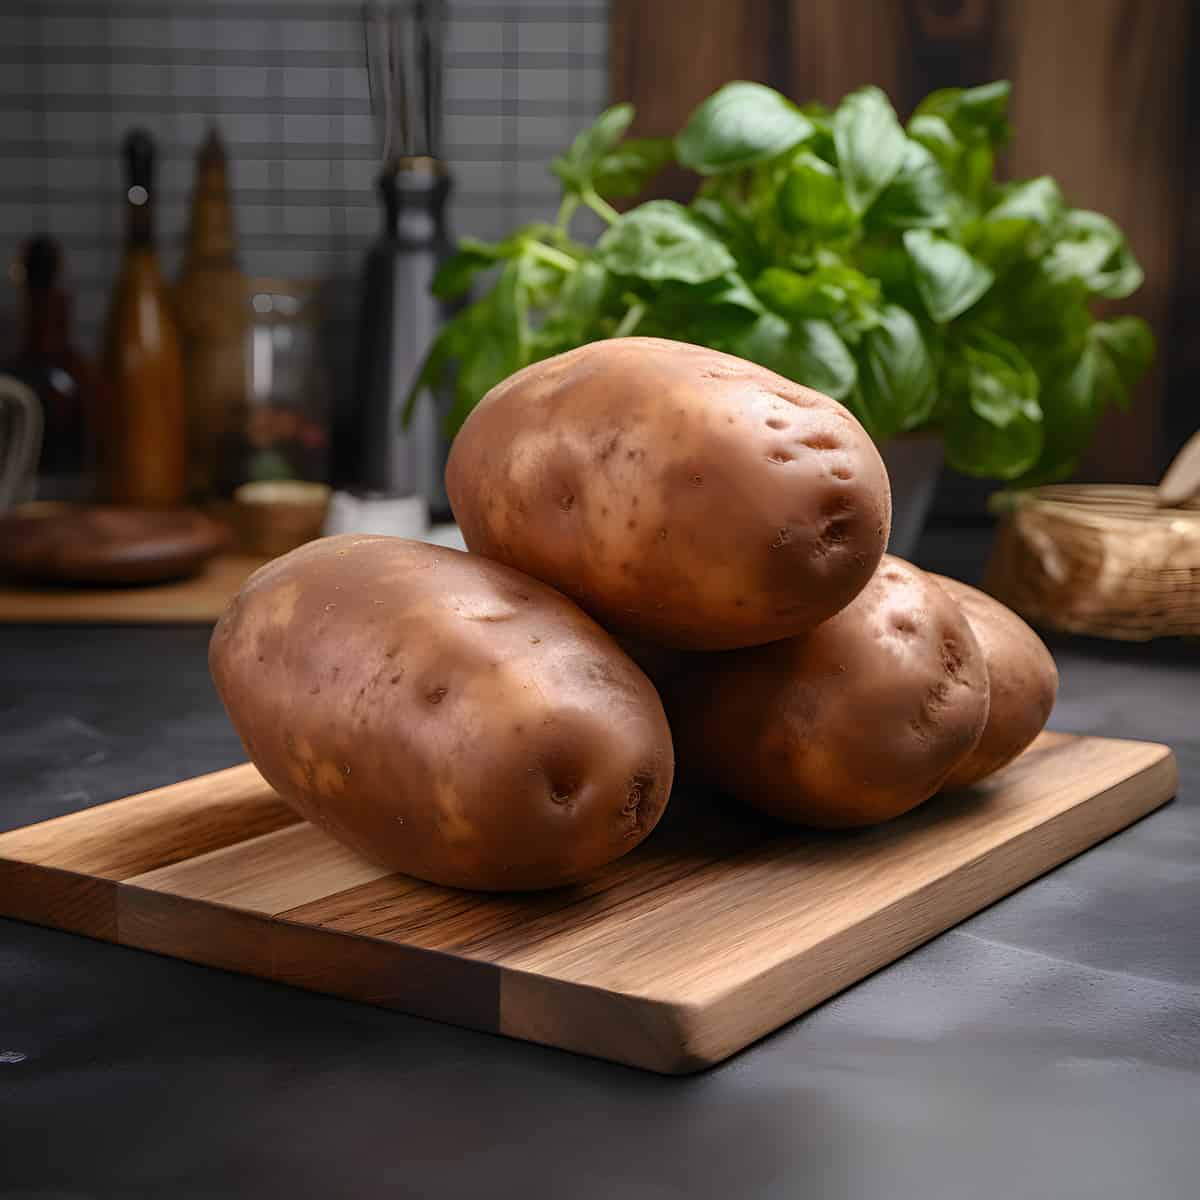 Russet Burbank Potatoes on a kitchen counter